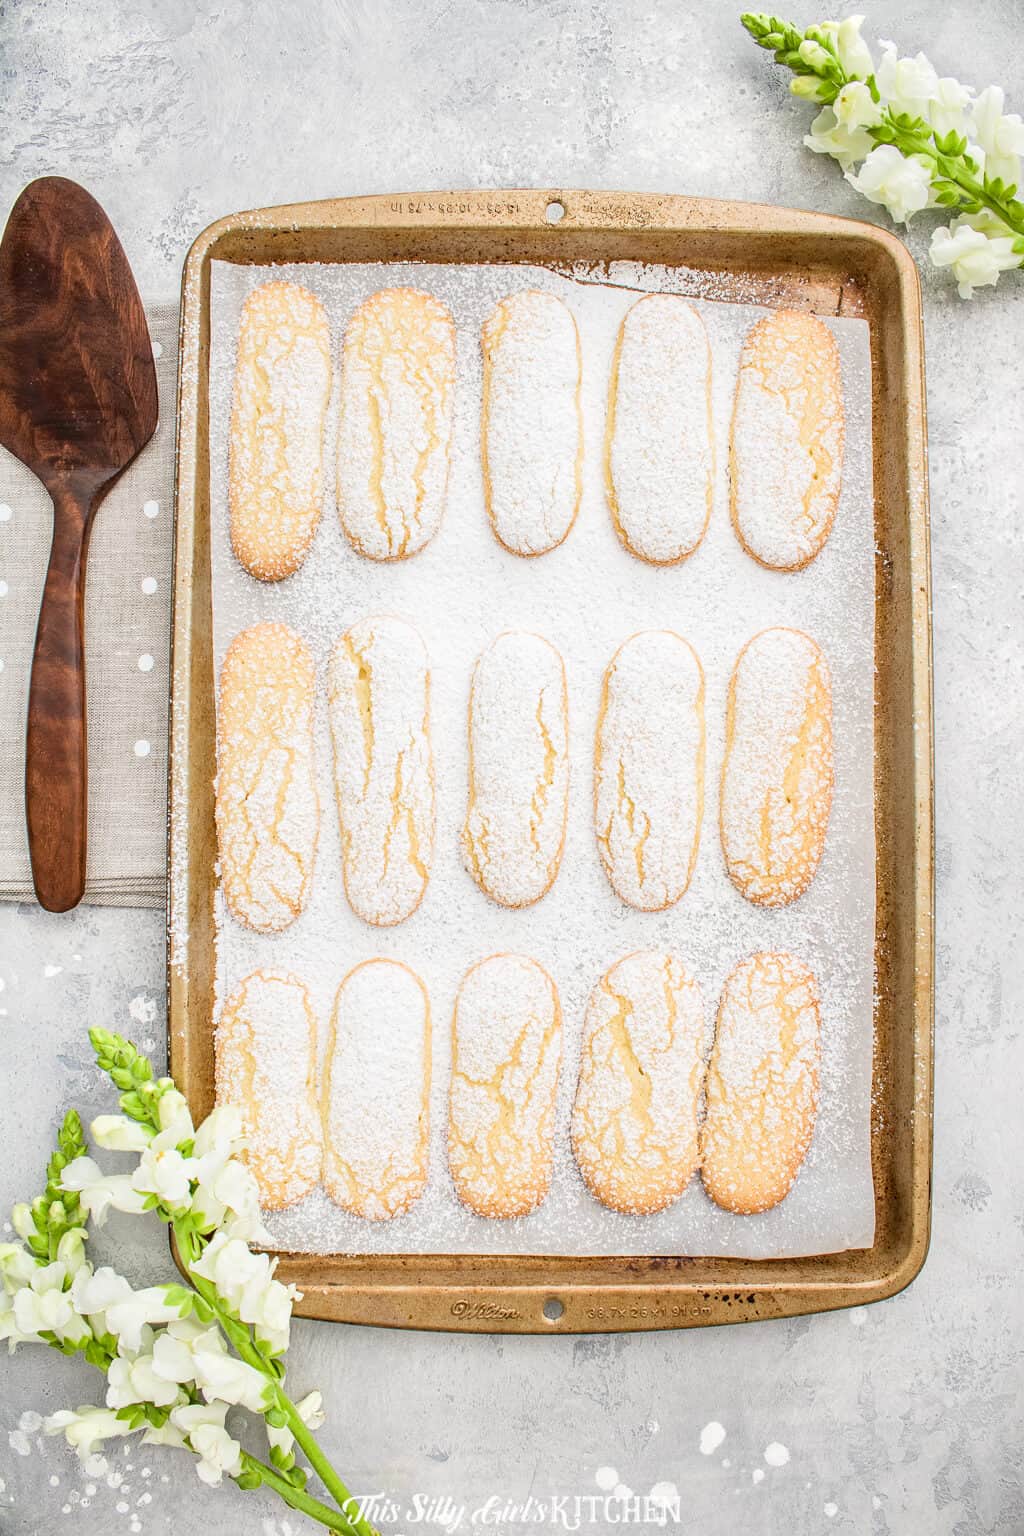 Ladyfinger cookies are light, crunchy cookies with a subtle sweetness. #Recipe from ThisSillyGirlsKitchen.com #ladyfinger #tiramisu #cookie #ladyfingersdessert